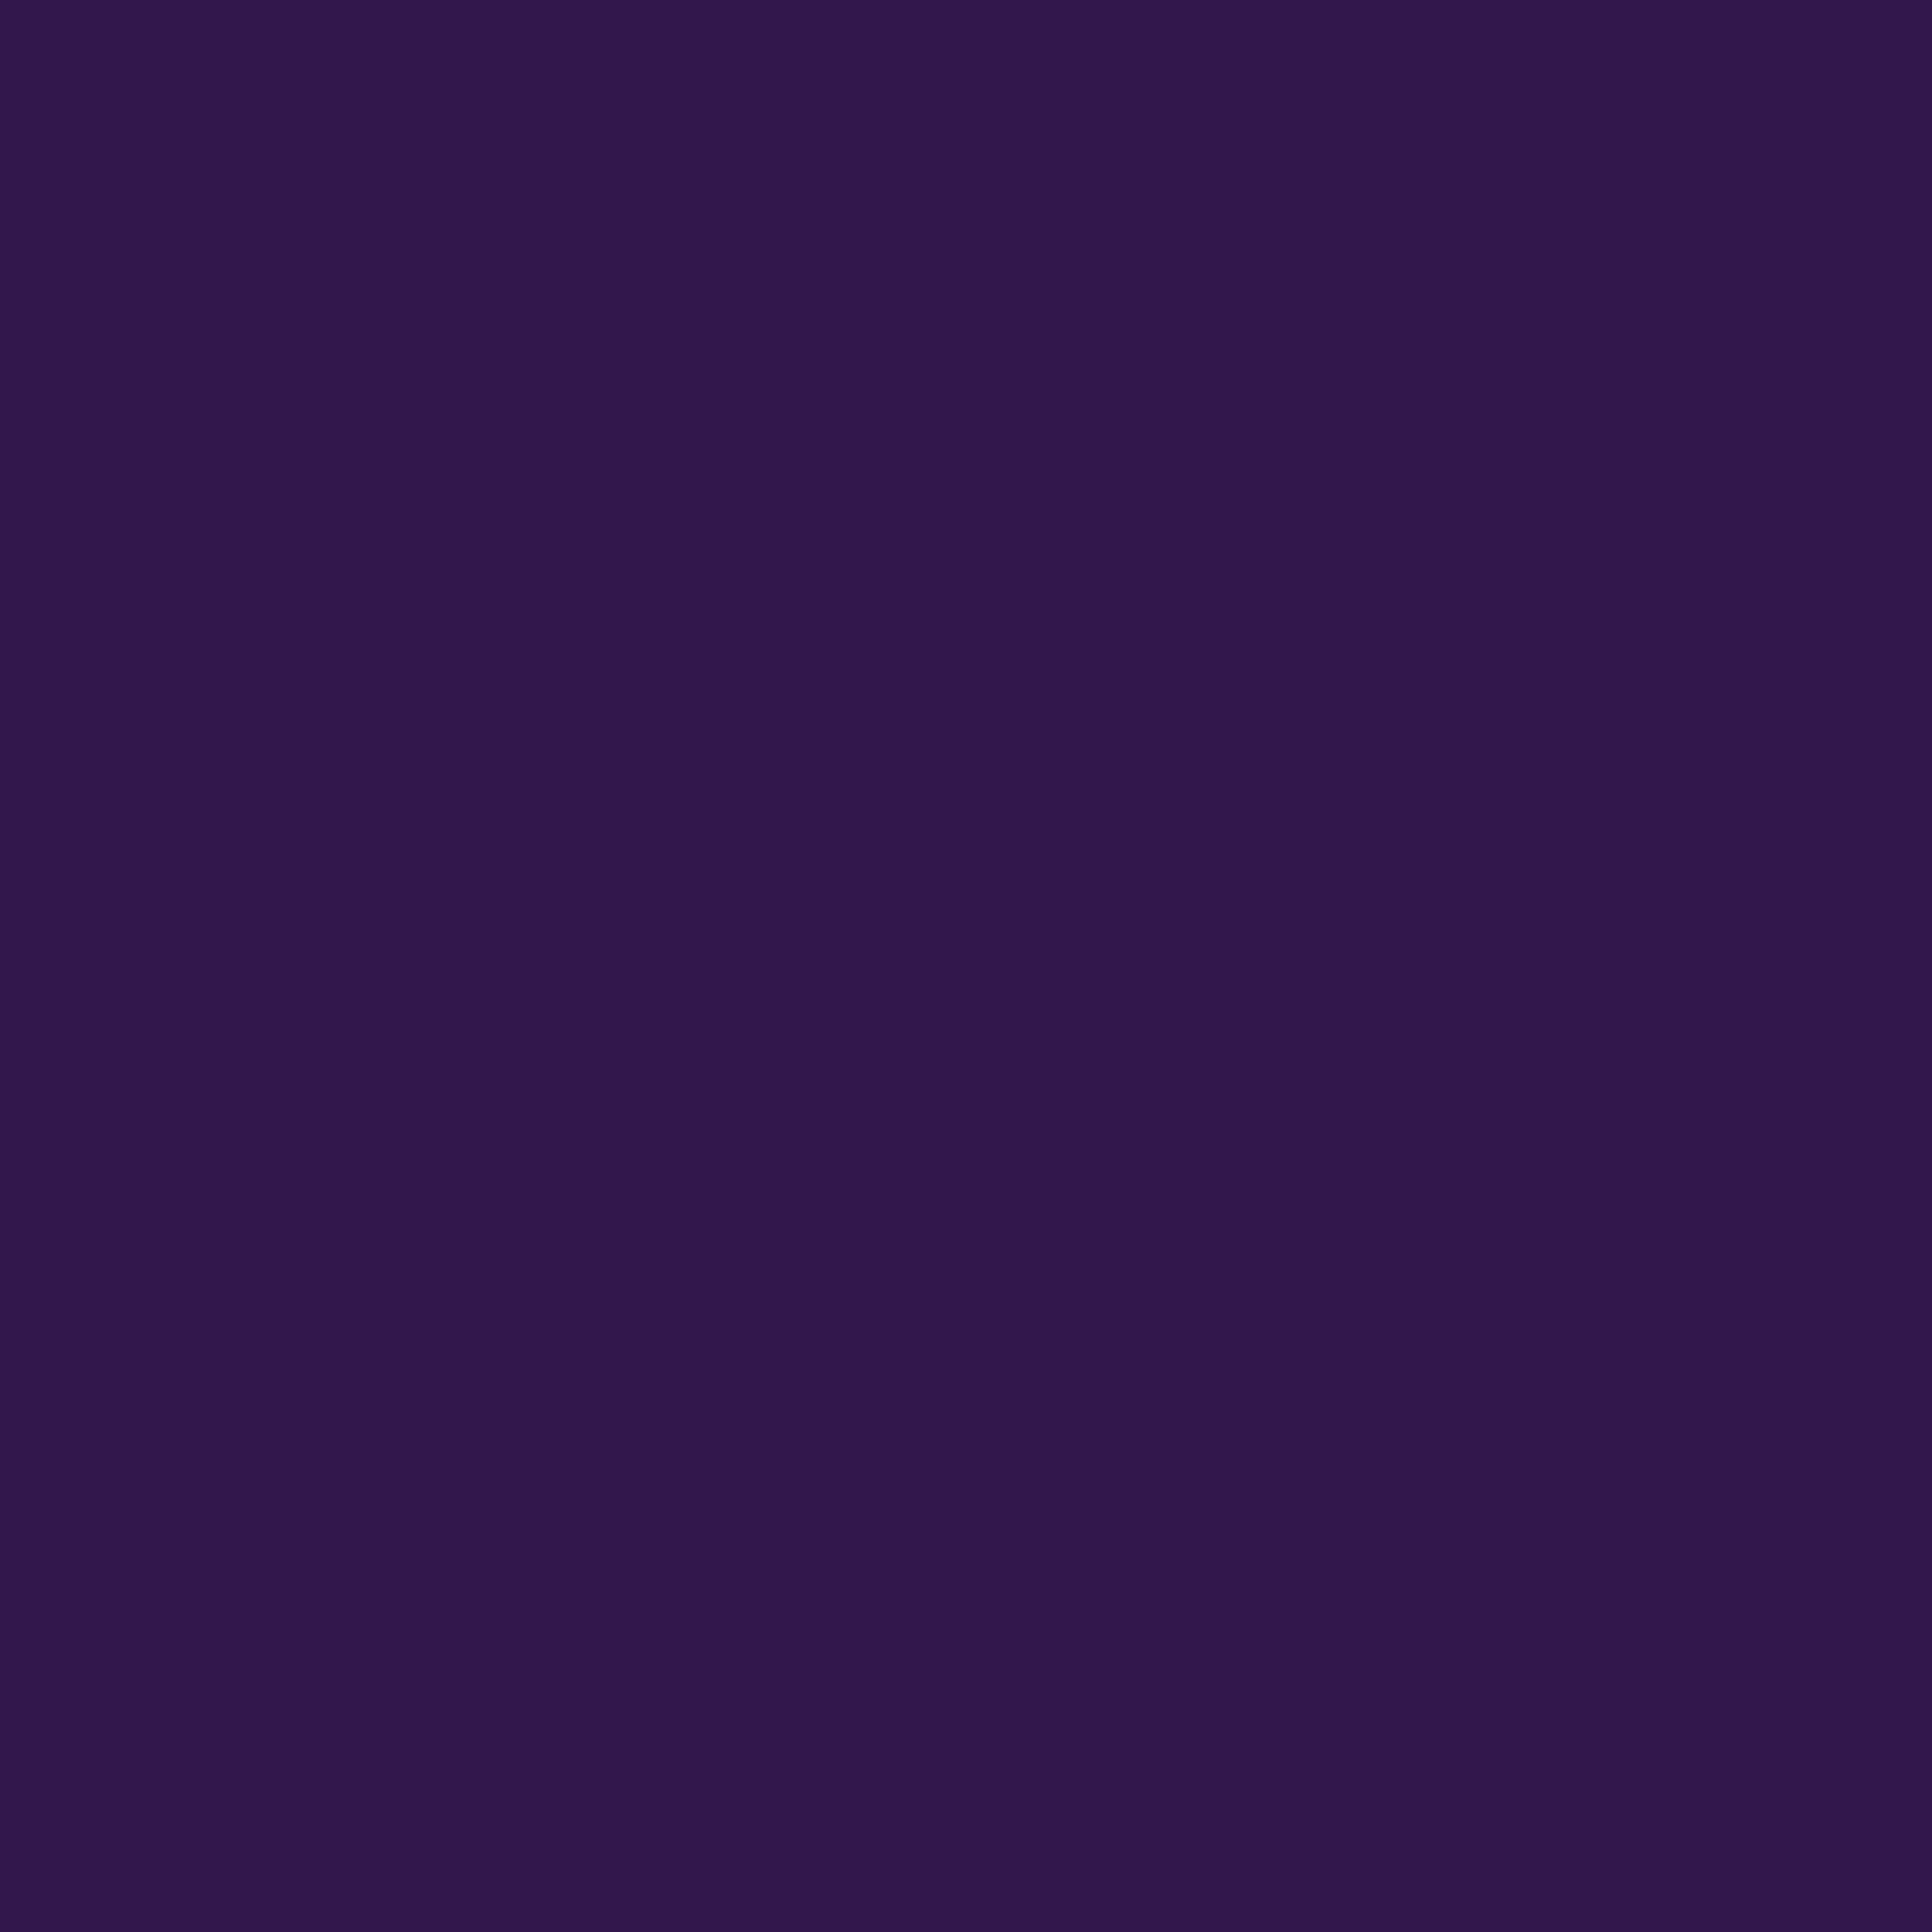 2048x2048 Russian Violet Solid Color Background